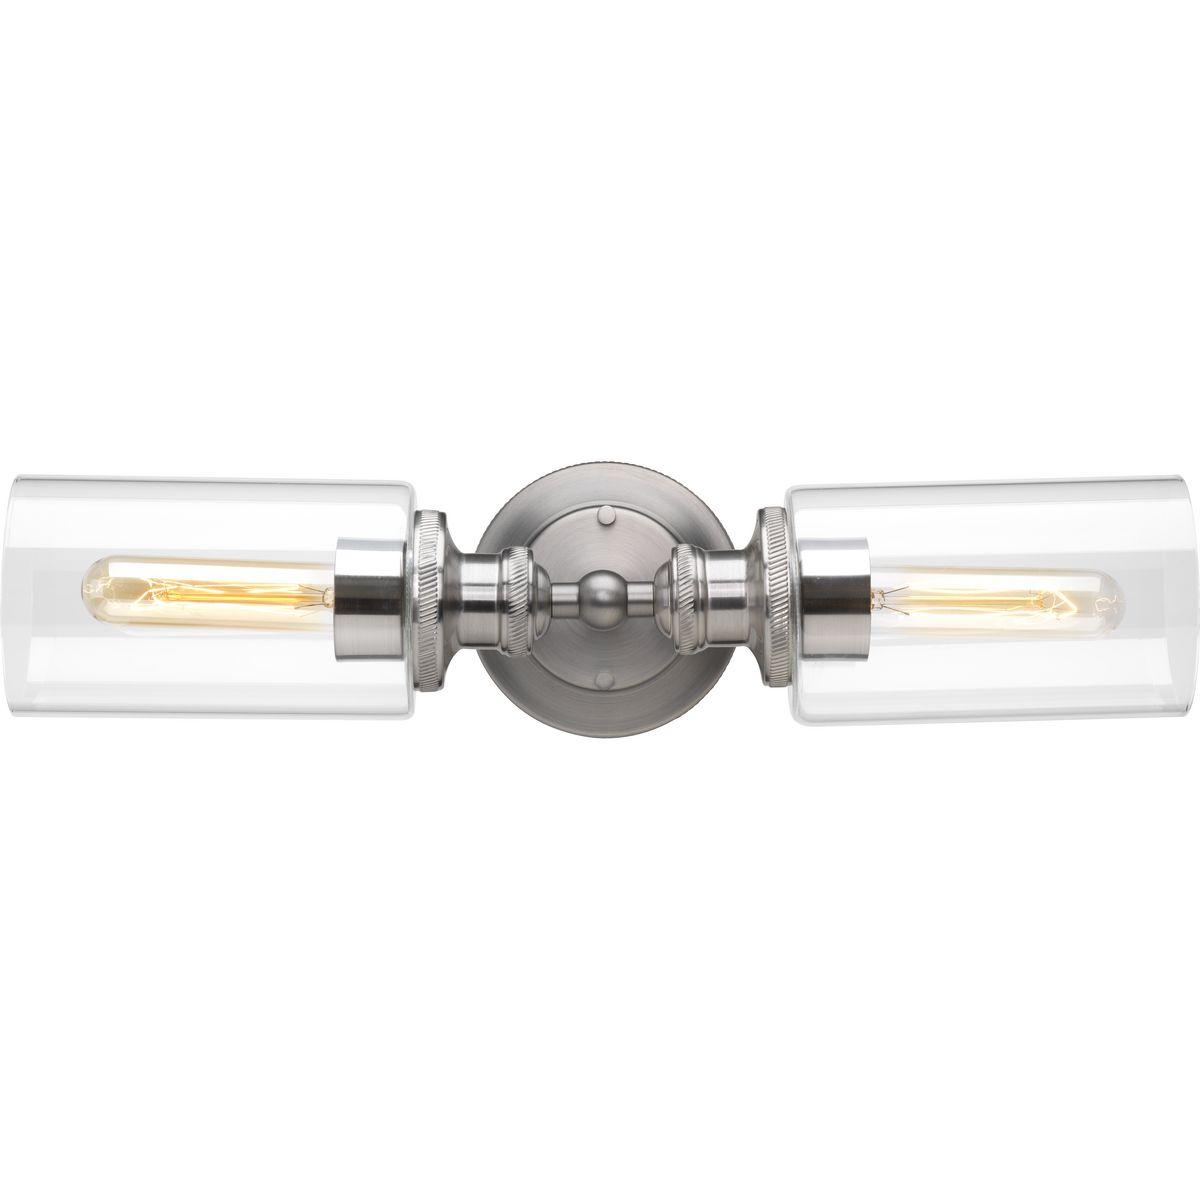 Hubbell P2809-81 This two-light bath & vanity fixture offer a vintage electric feel. Clear glass shades featured on either side of the back plate. Two-toned finish antique nickel with polished chrome accents. Can be mounted horizontally or vertically.  ; Ideal for a bathr